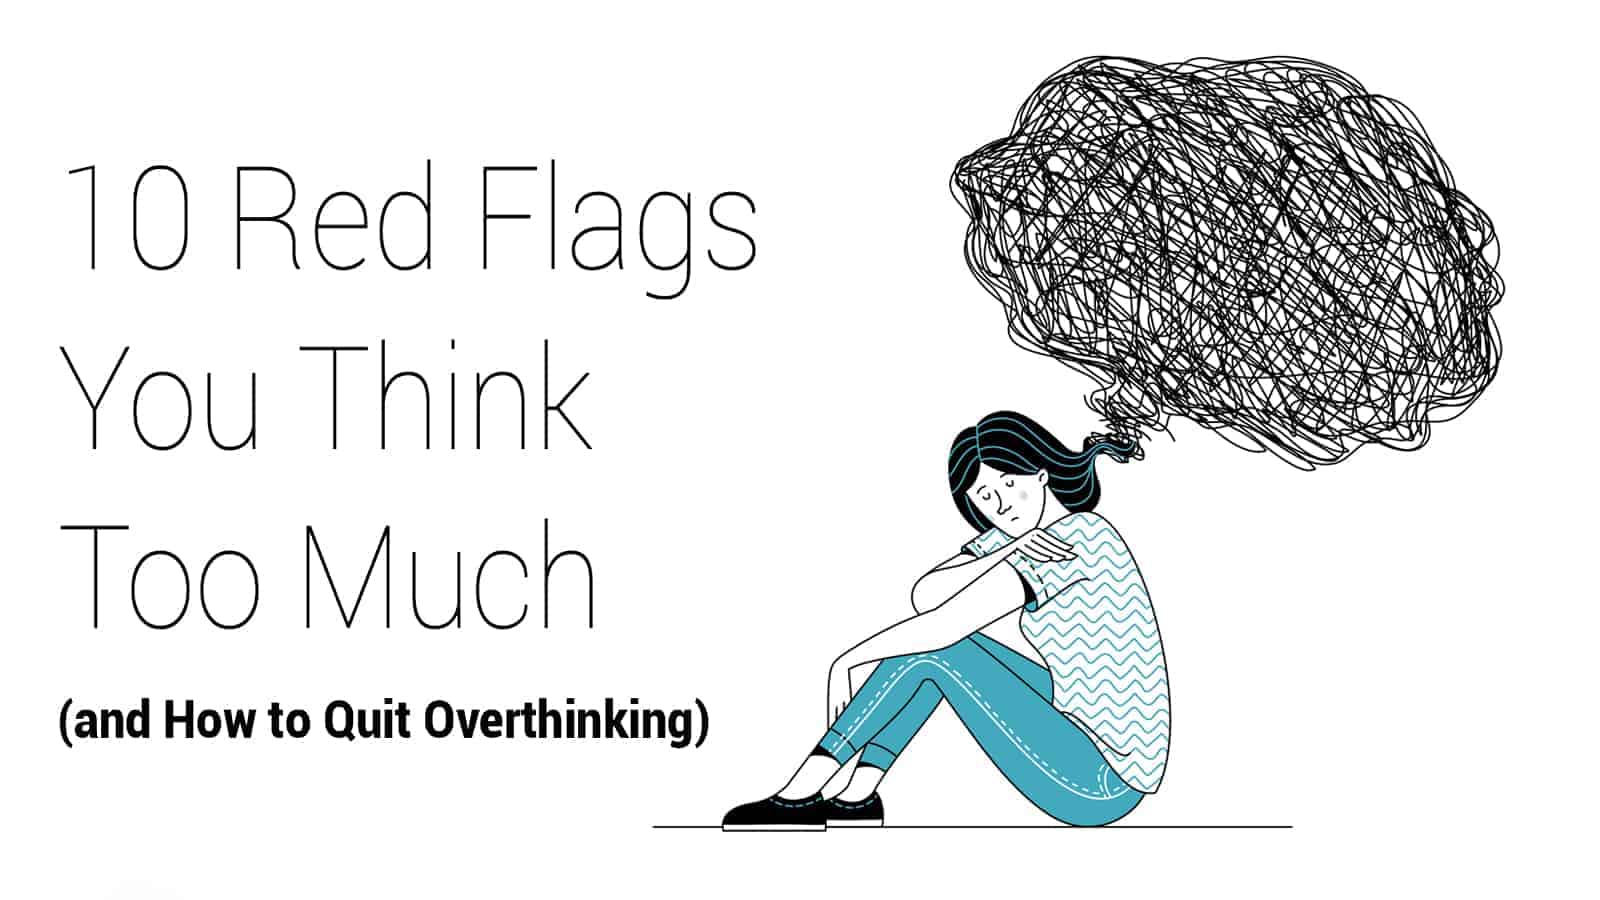 10 Red Flags You Think Too Much (and How to Quit Overthinking)